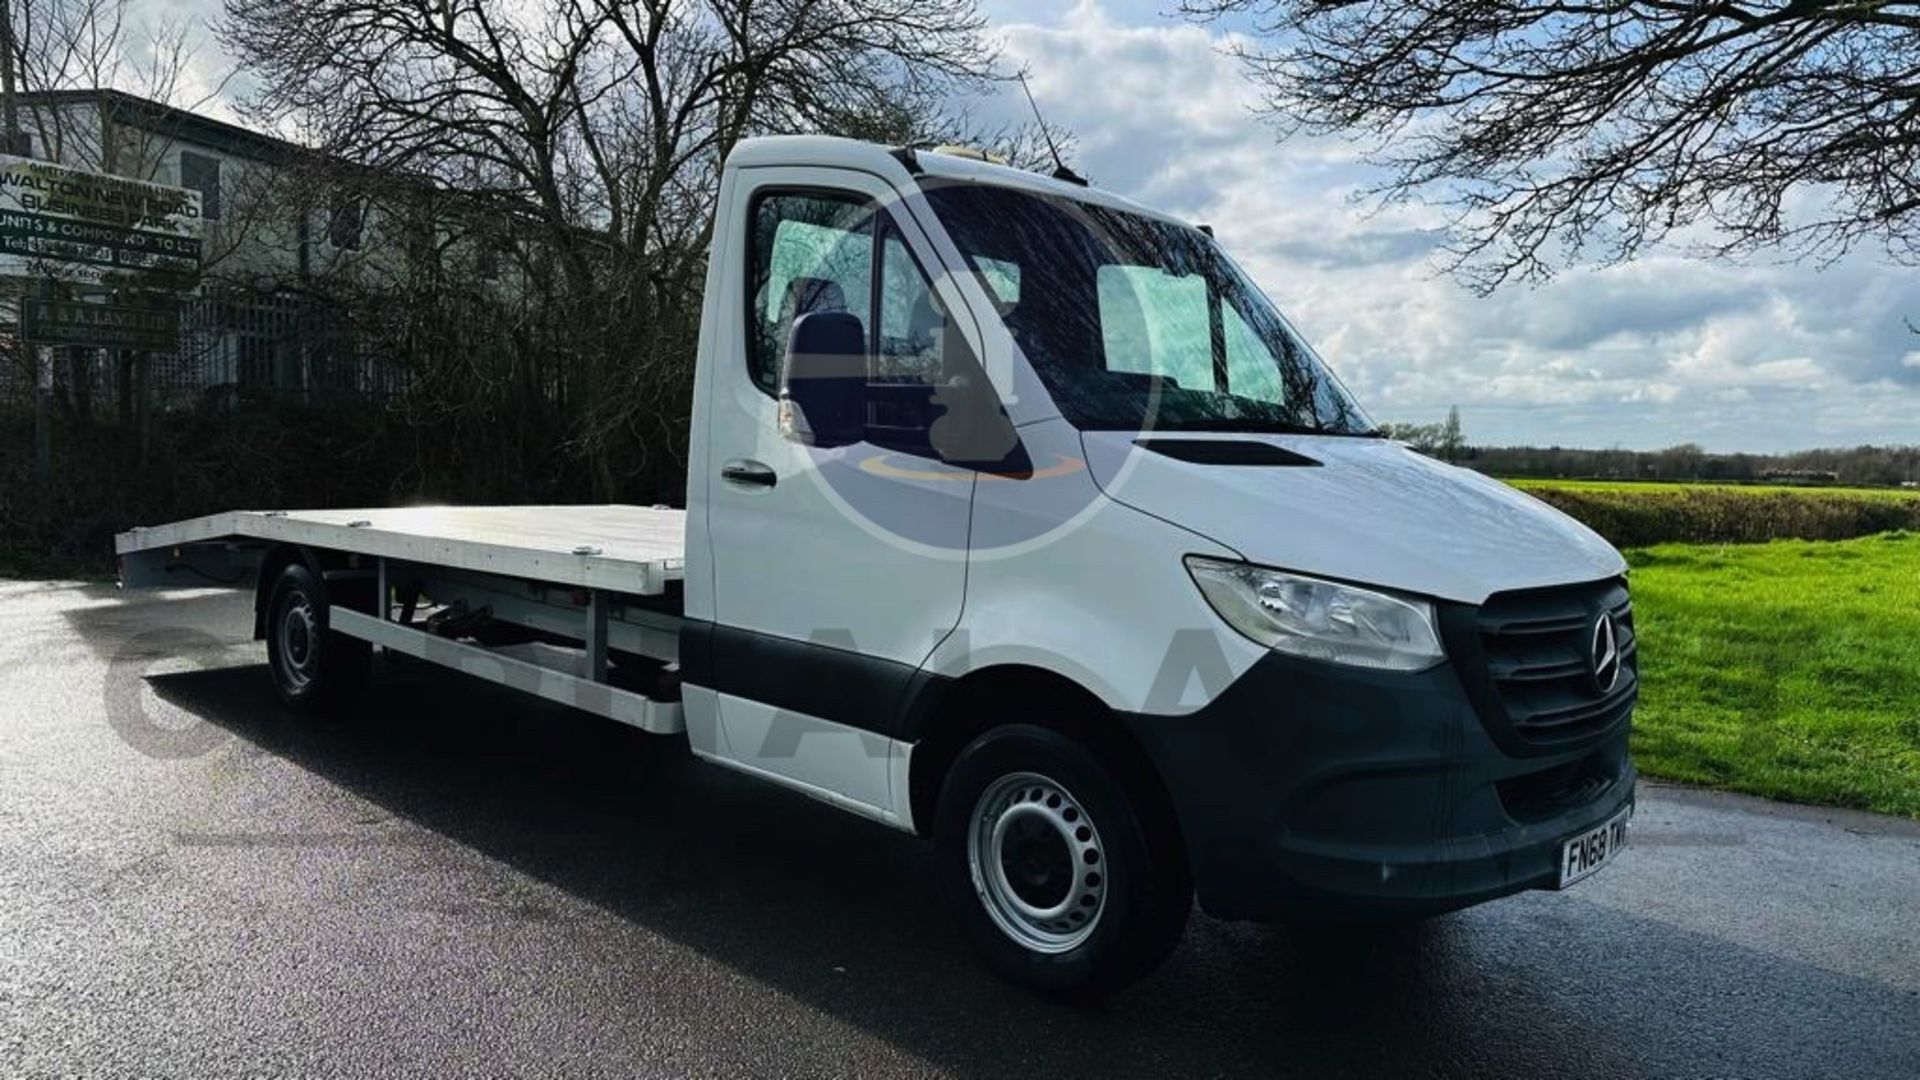 MERCEDES SPRINTER 314CDI "LWB RECOVERY TRUCK" 2019 MODEL - 1 OWNER - NEW BODY FITTED WITH ELEC WINCH - Image 3 of 37